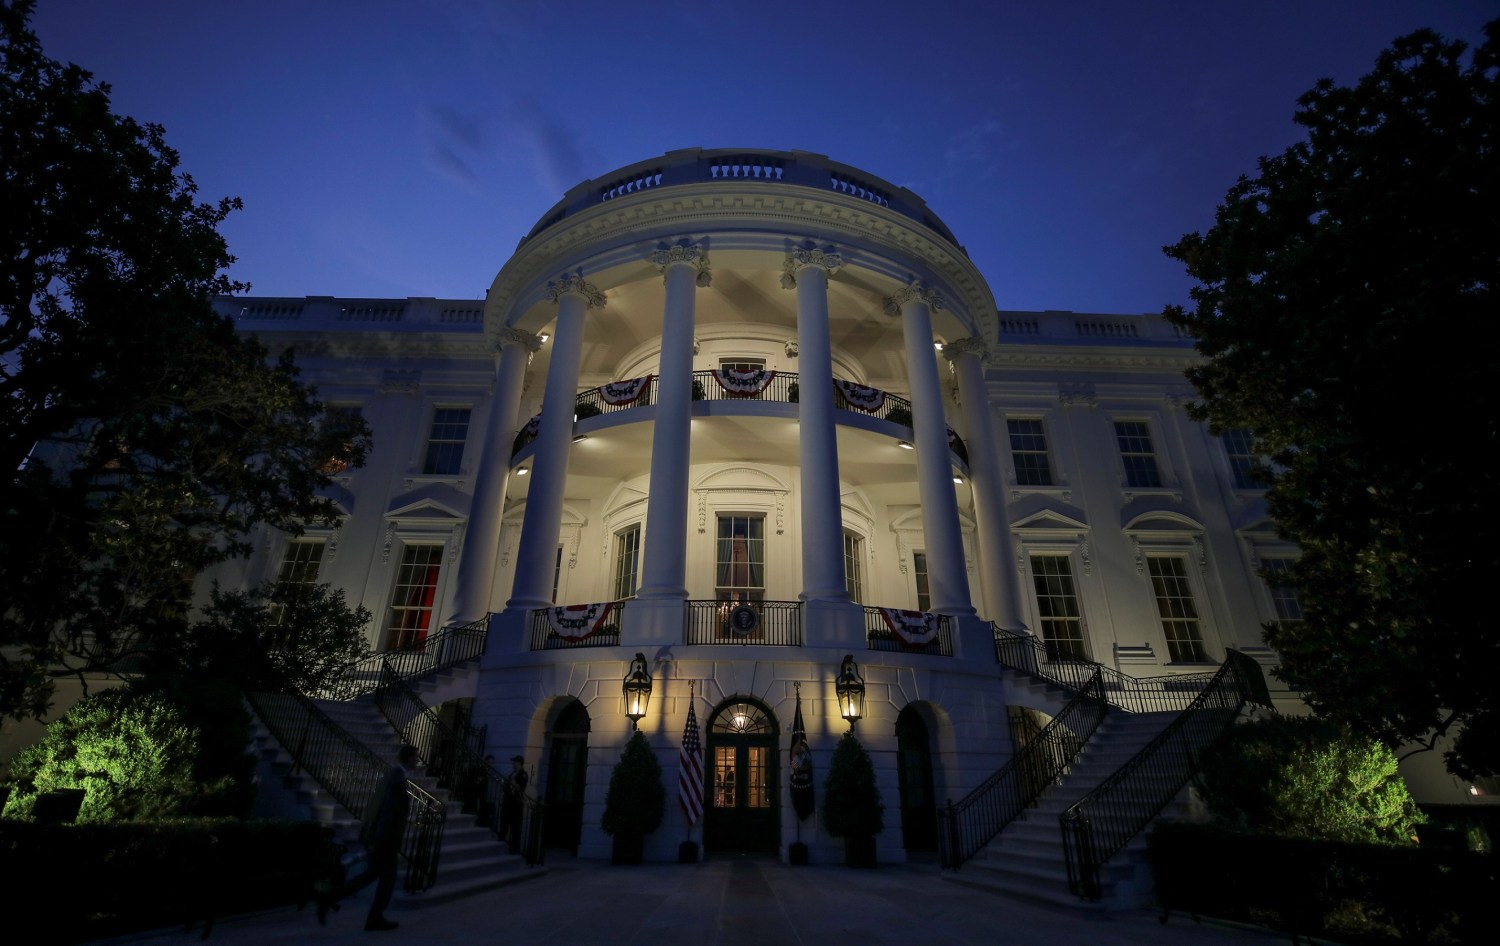 The South Portico and residence of the White House are illuminated before U.S. President Donald Trump and first lady Melania Trump emerged to watch the Washington, D.C. fireworks display from the Truman Balcony while celebrating the U.S. Independence Day holiday at the White House in Washington, U.S., July 4, 2020.   REUTERS/Carlos Barria